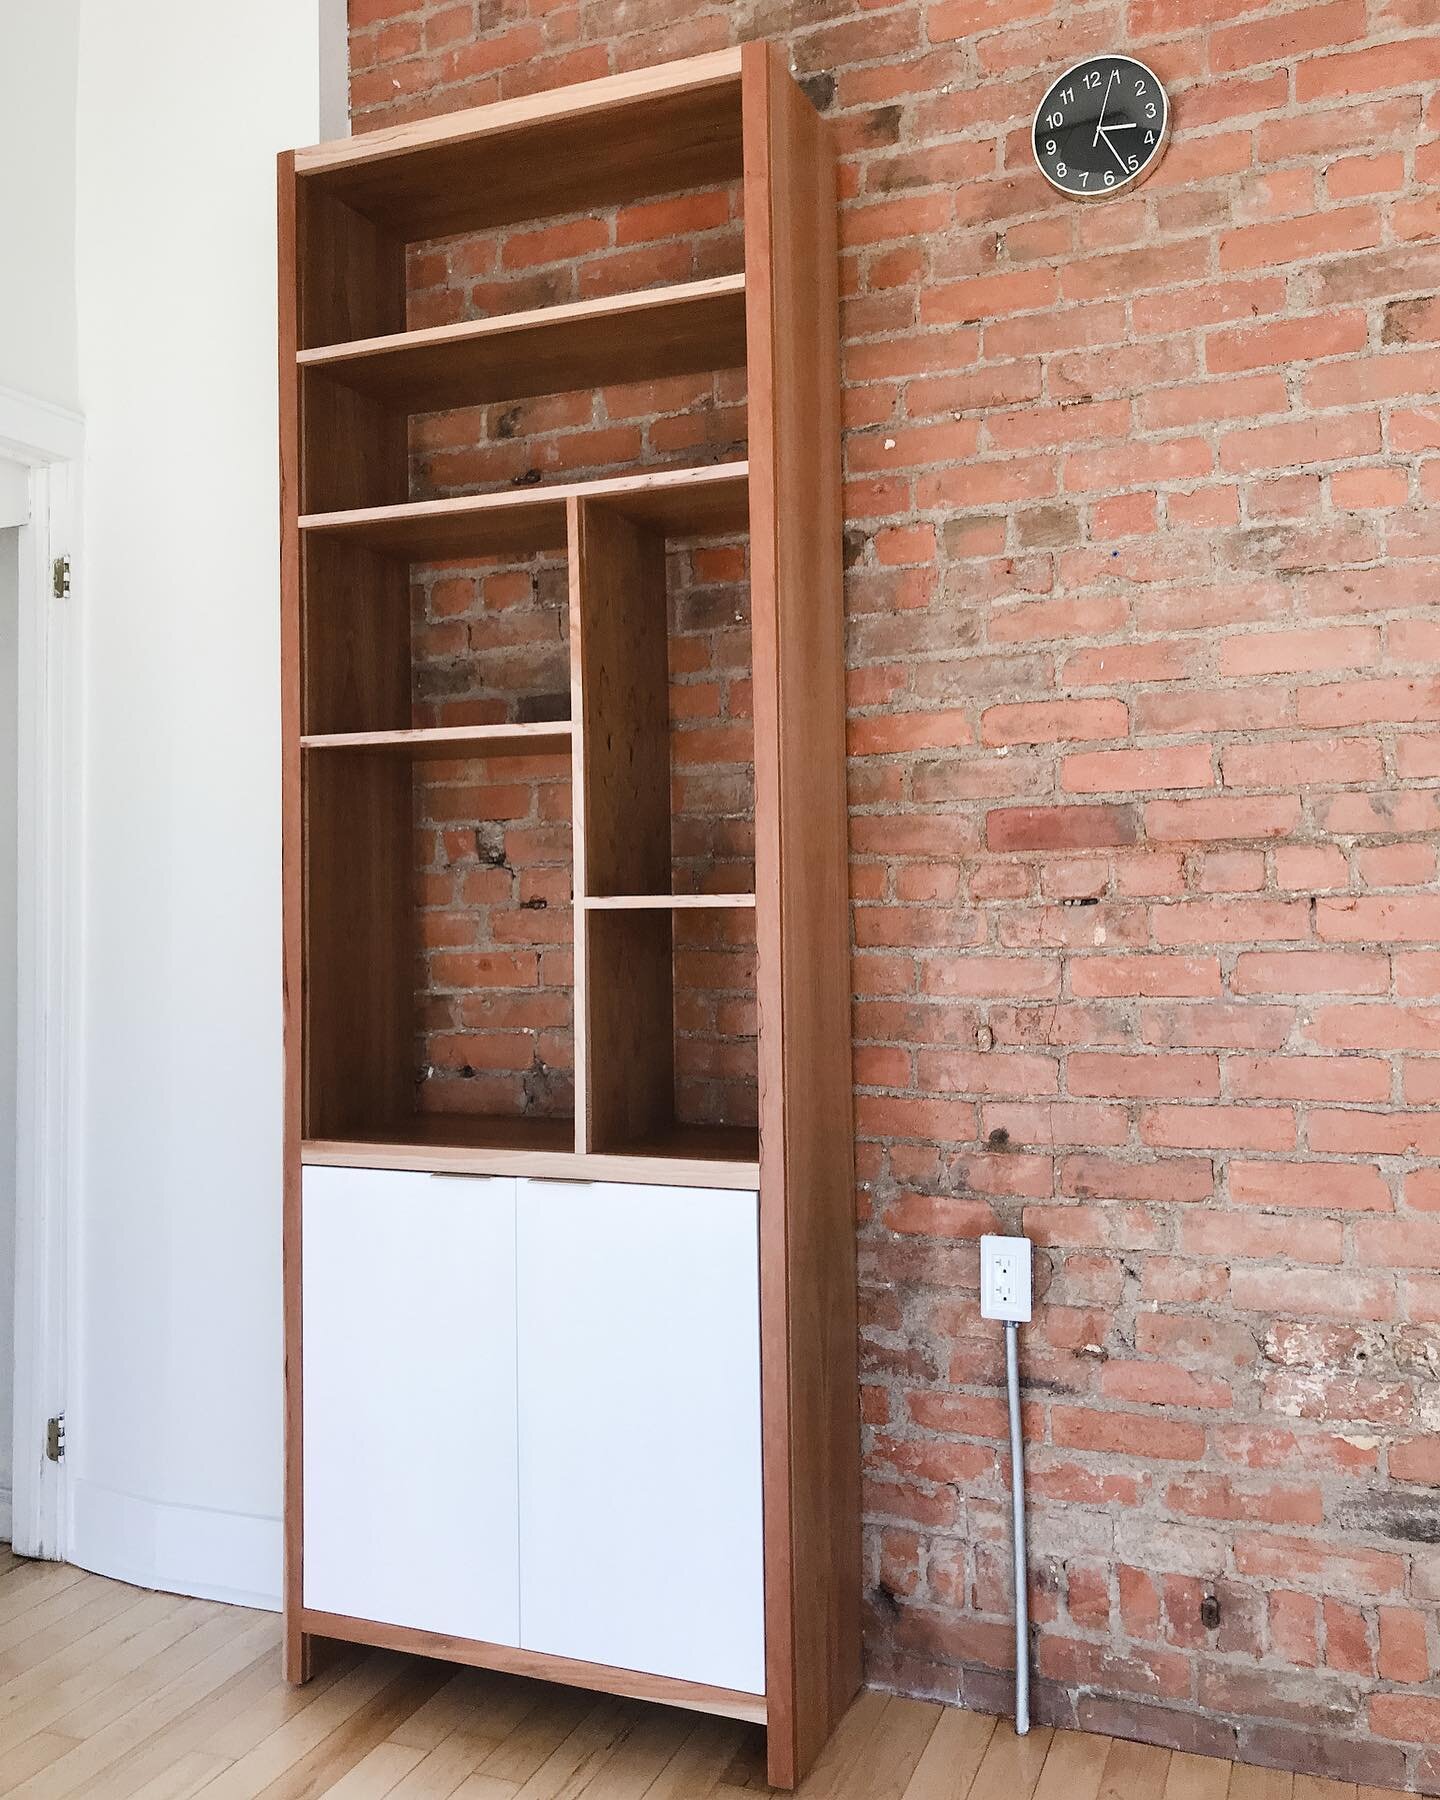 Very happy to have delivered our asymmetrical shelving unit to its new home at @strutsalon

This piece features cherry construction and white enclosed storage below.

This style can be fully customized to suit your space with a custom order. You can 